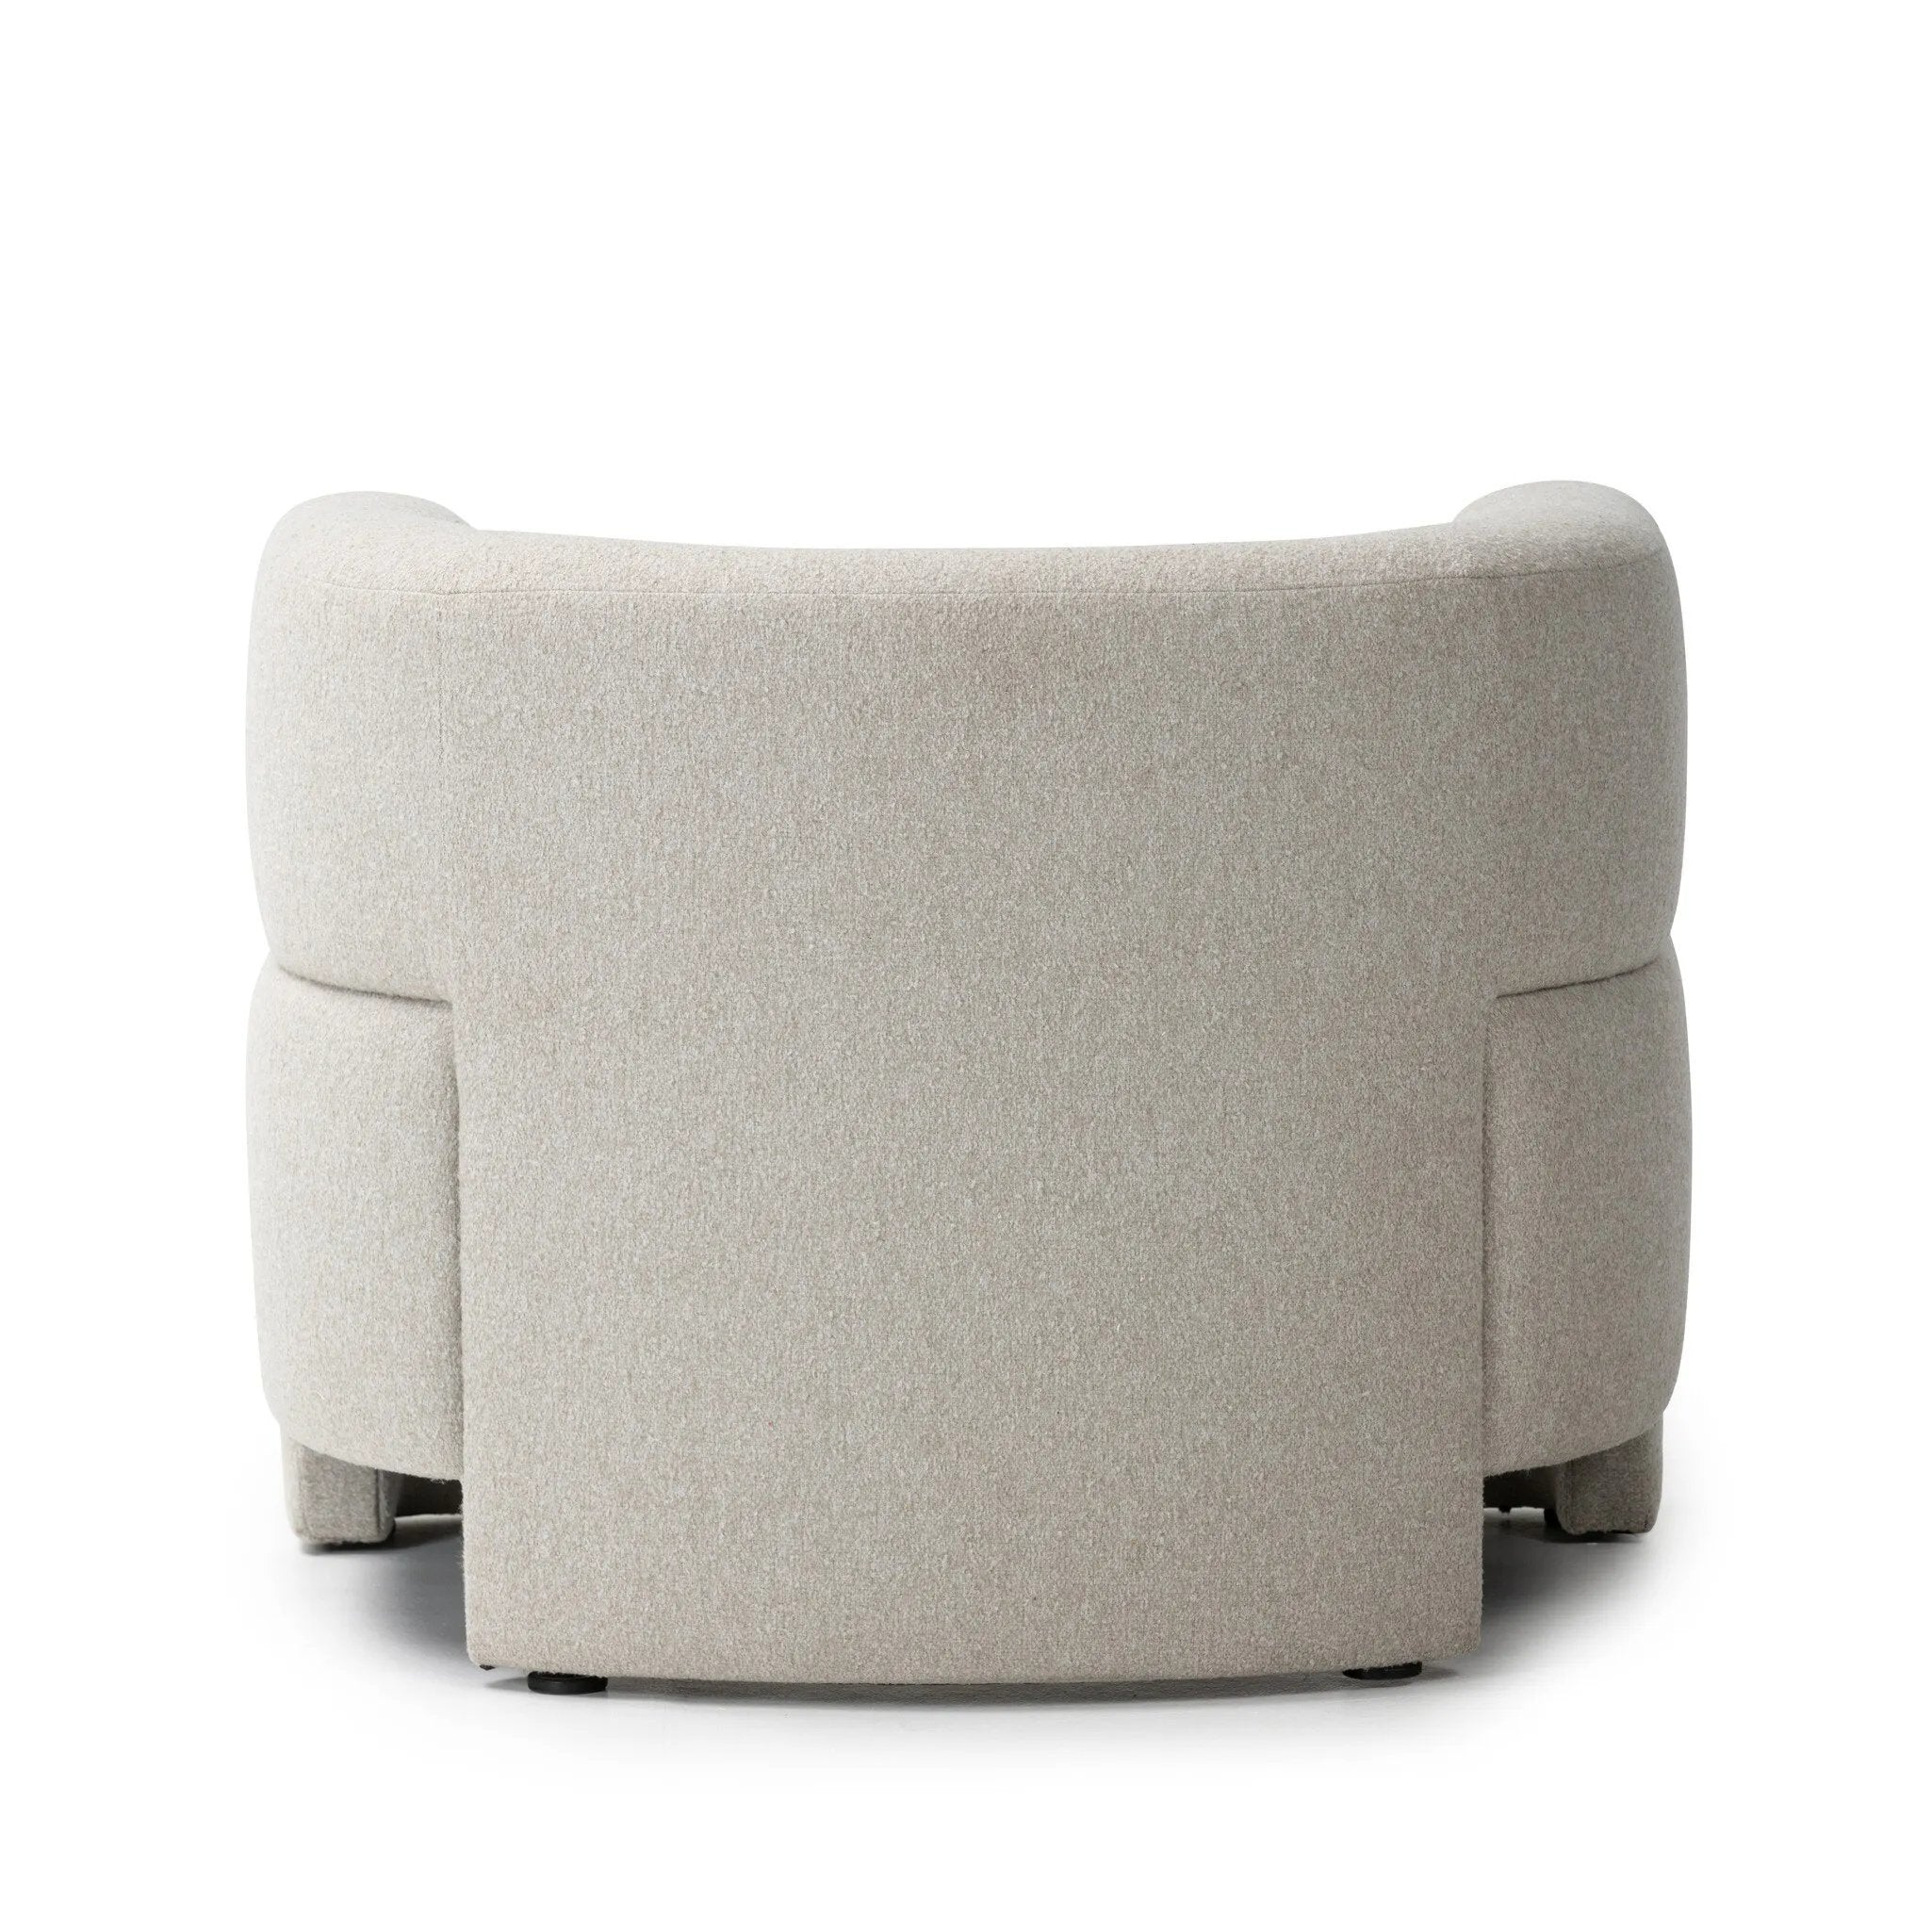 This contemporary wraparound chair melds two forms for a study in seamless balance. The seat's modern form is neutralized with an understated pebble color, while sleek cutouts emphasize the tri-leg base.Collection: Farro Amethyst Home provides interior design, new home construction design consulting, vintage area rugs, and lighting in the Monterey metro area.